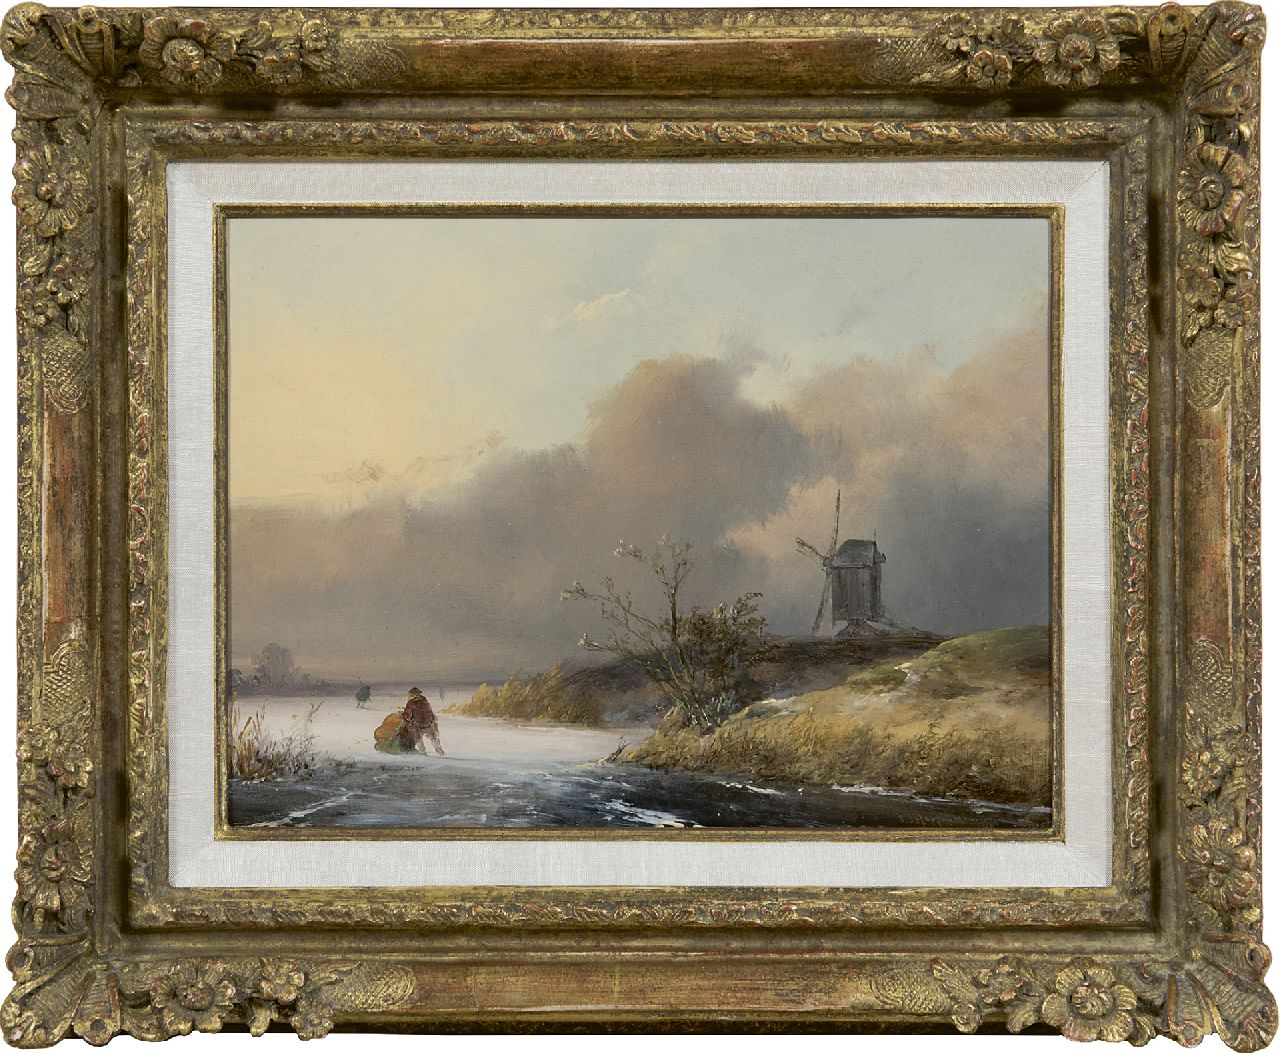 Hoppenbrouwers J.F.  | Johannes Franciscus Hoppenbrouwers | Paintings offered for sale | Skaters in a winter landscape, oil on panel 18.9 x 24.9 cm, signed l.r. and dated '49